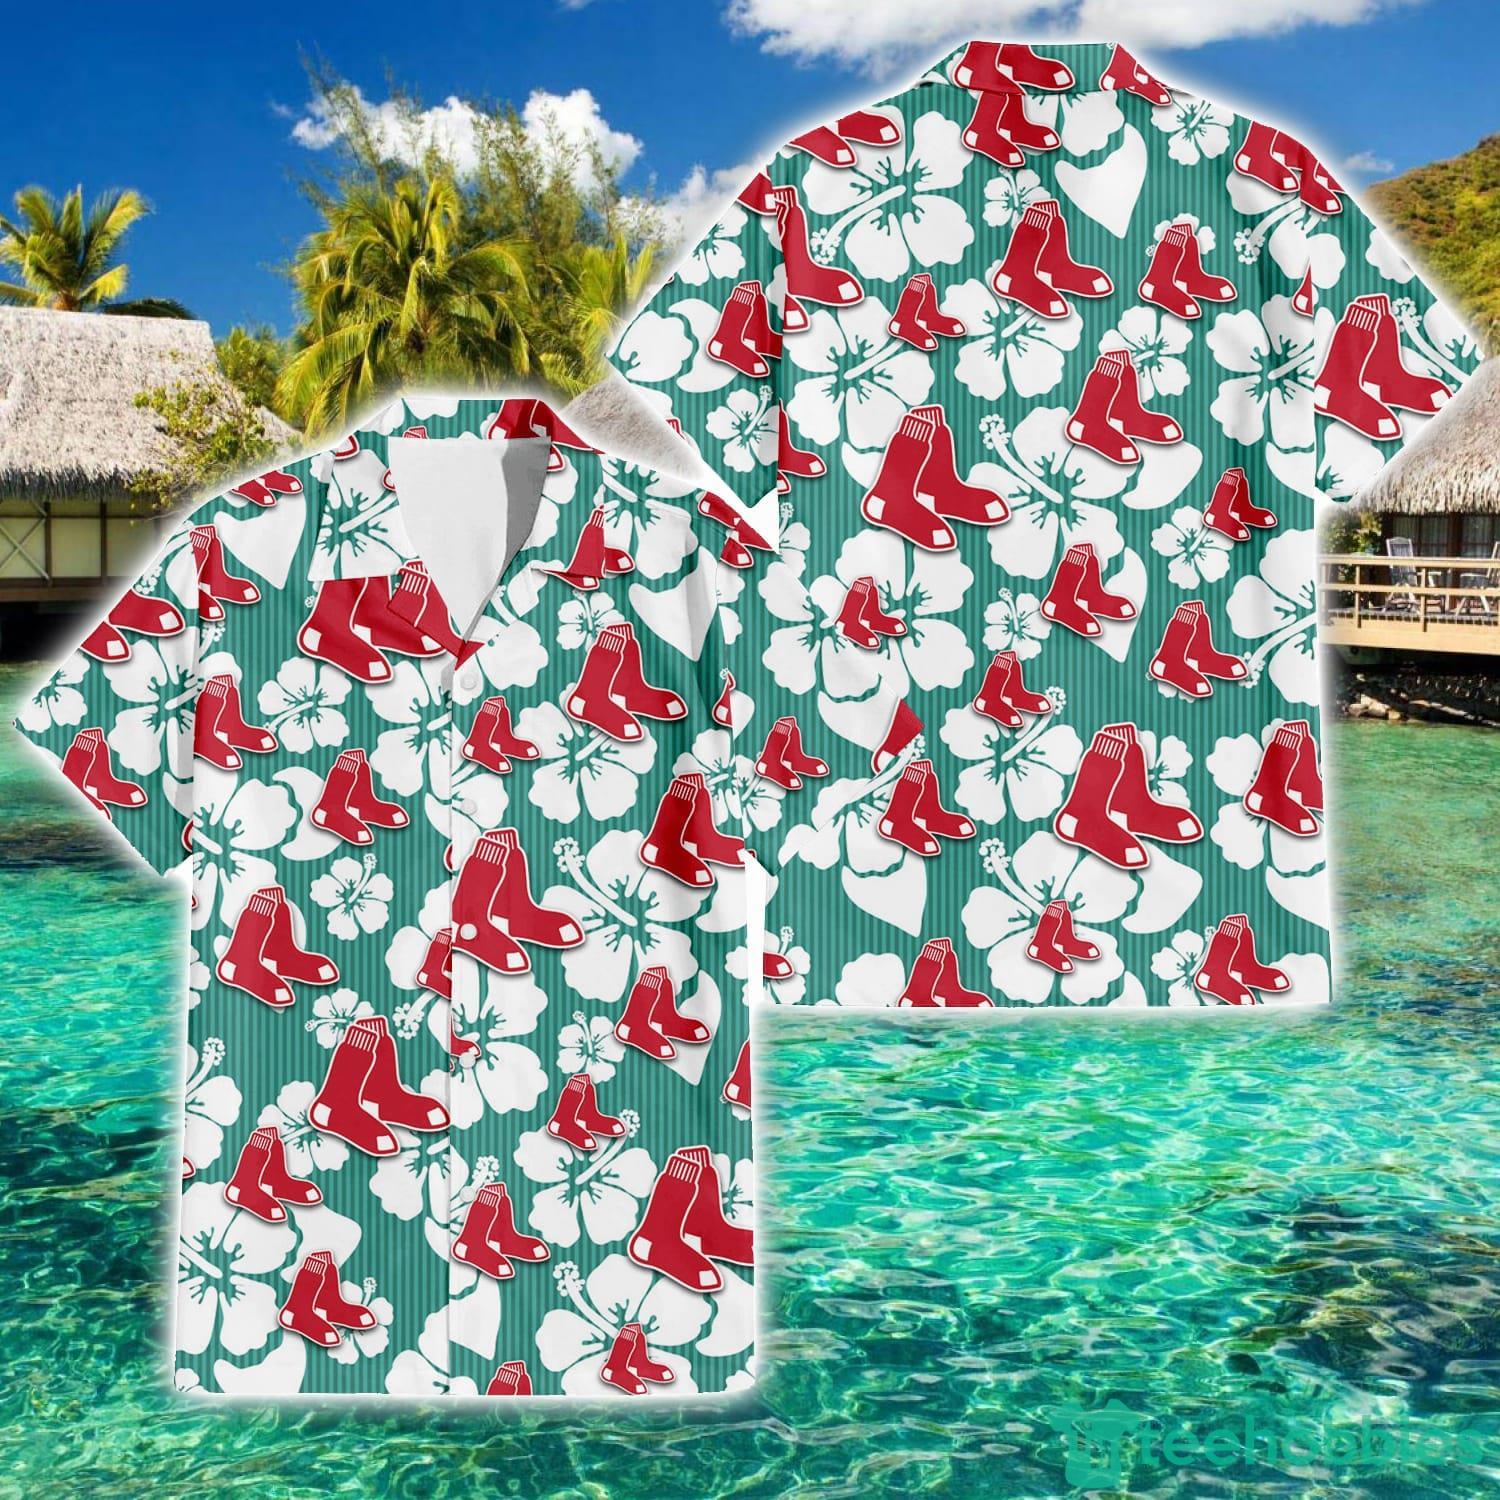 Boston Red Sox Summer Floral Polo Shirt - Freedomdesign